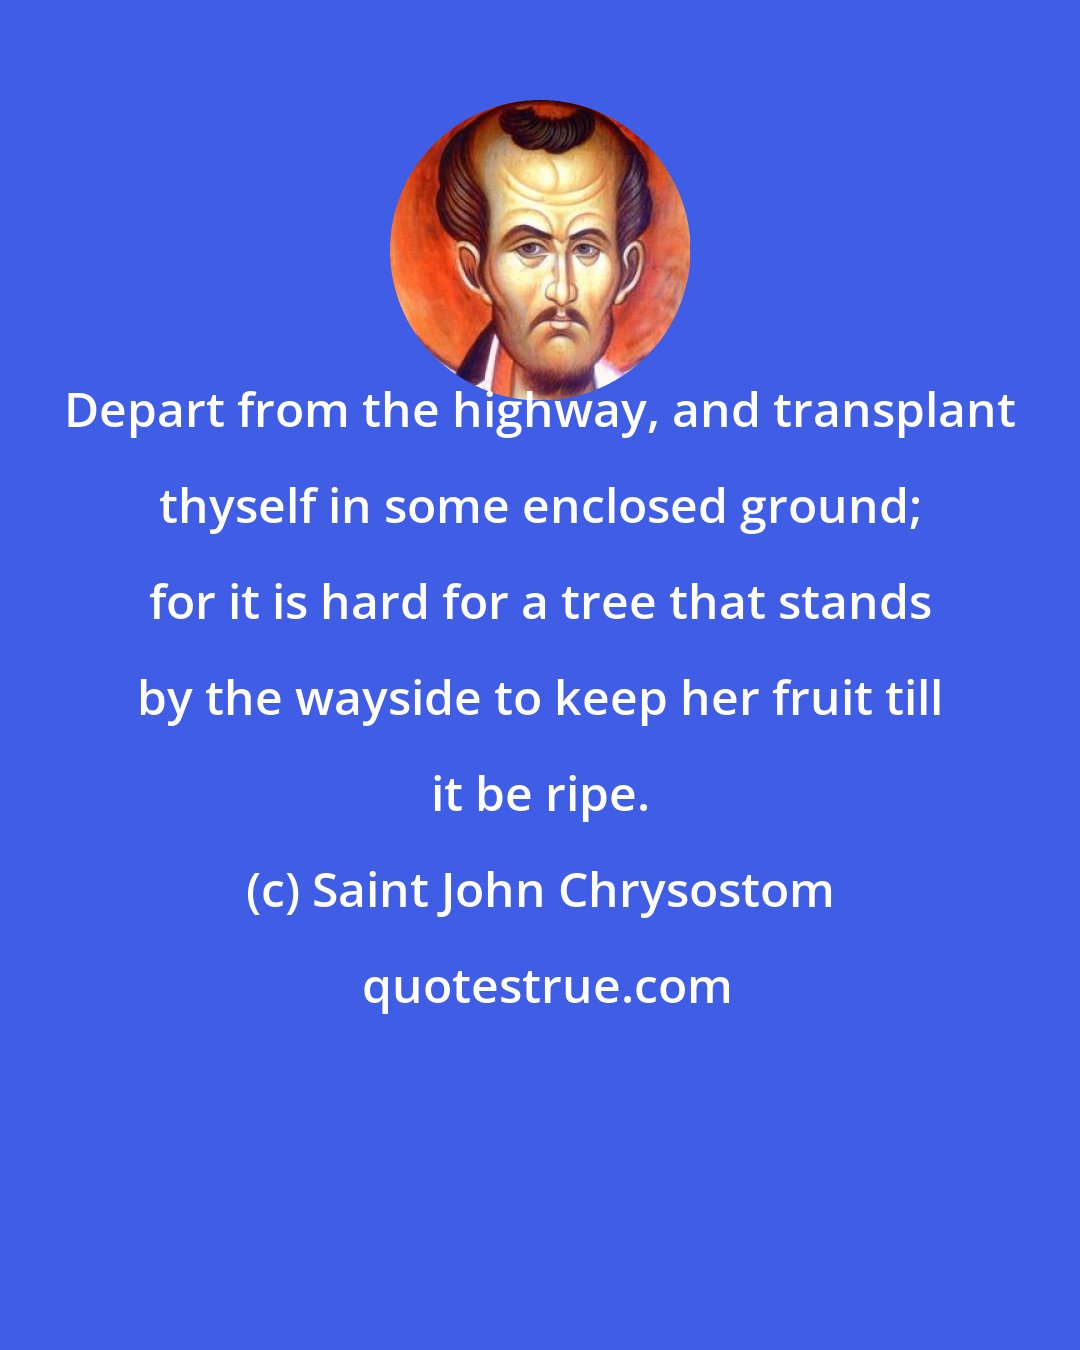 Saint John Chrysostom: Depart from the highway, and transplant thyself in some enclosed ground; for it is hard for a tree that stands by the wayside to keep her fruit till it be ripe.